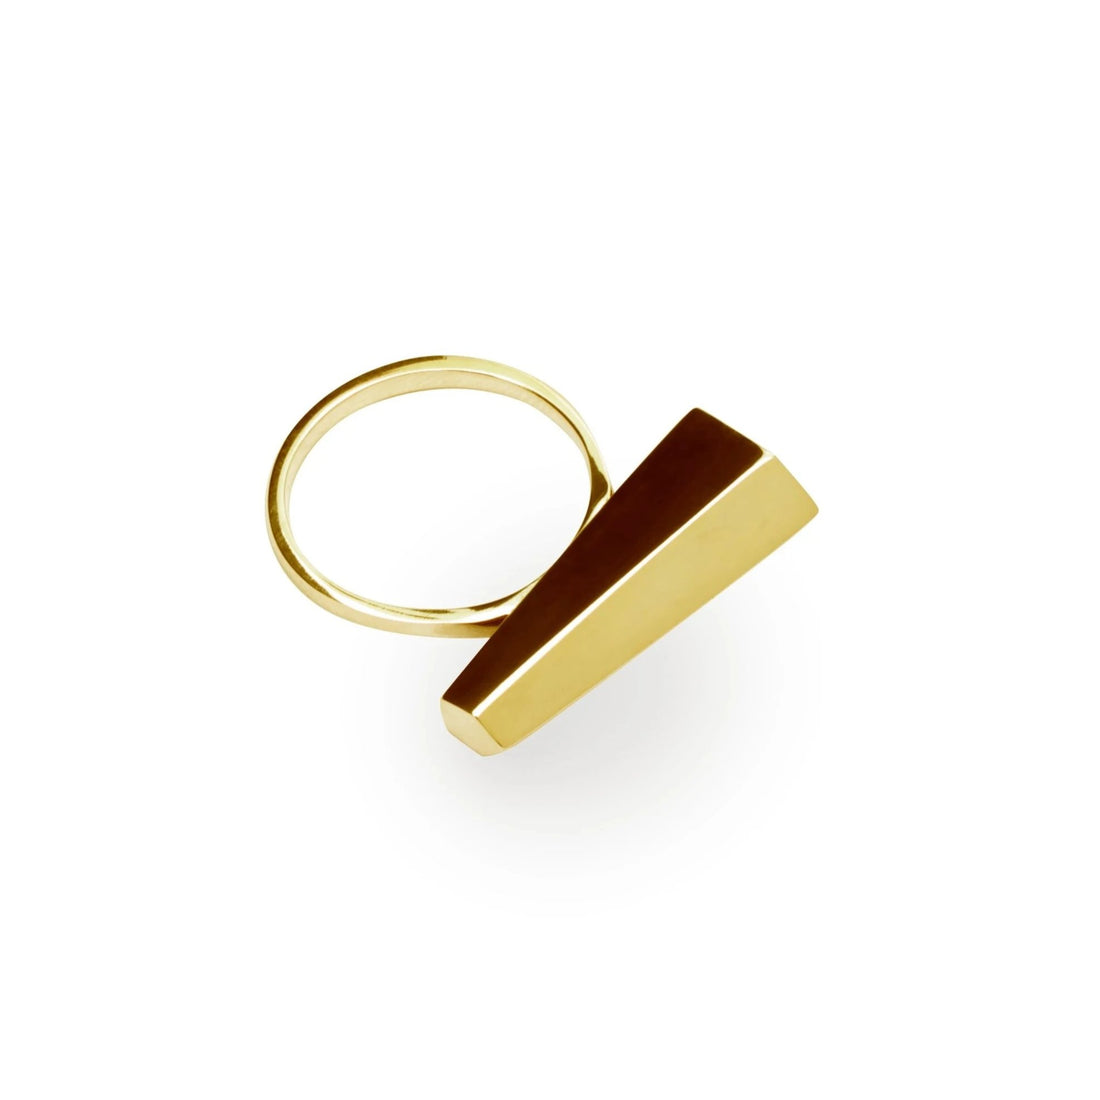 top view of vermeil gold sturdy ring unisex jewelry montreal handmade in canada yelklow gold ring silver edgy bold minimalist shapes ethical montreal jewelry studio 